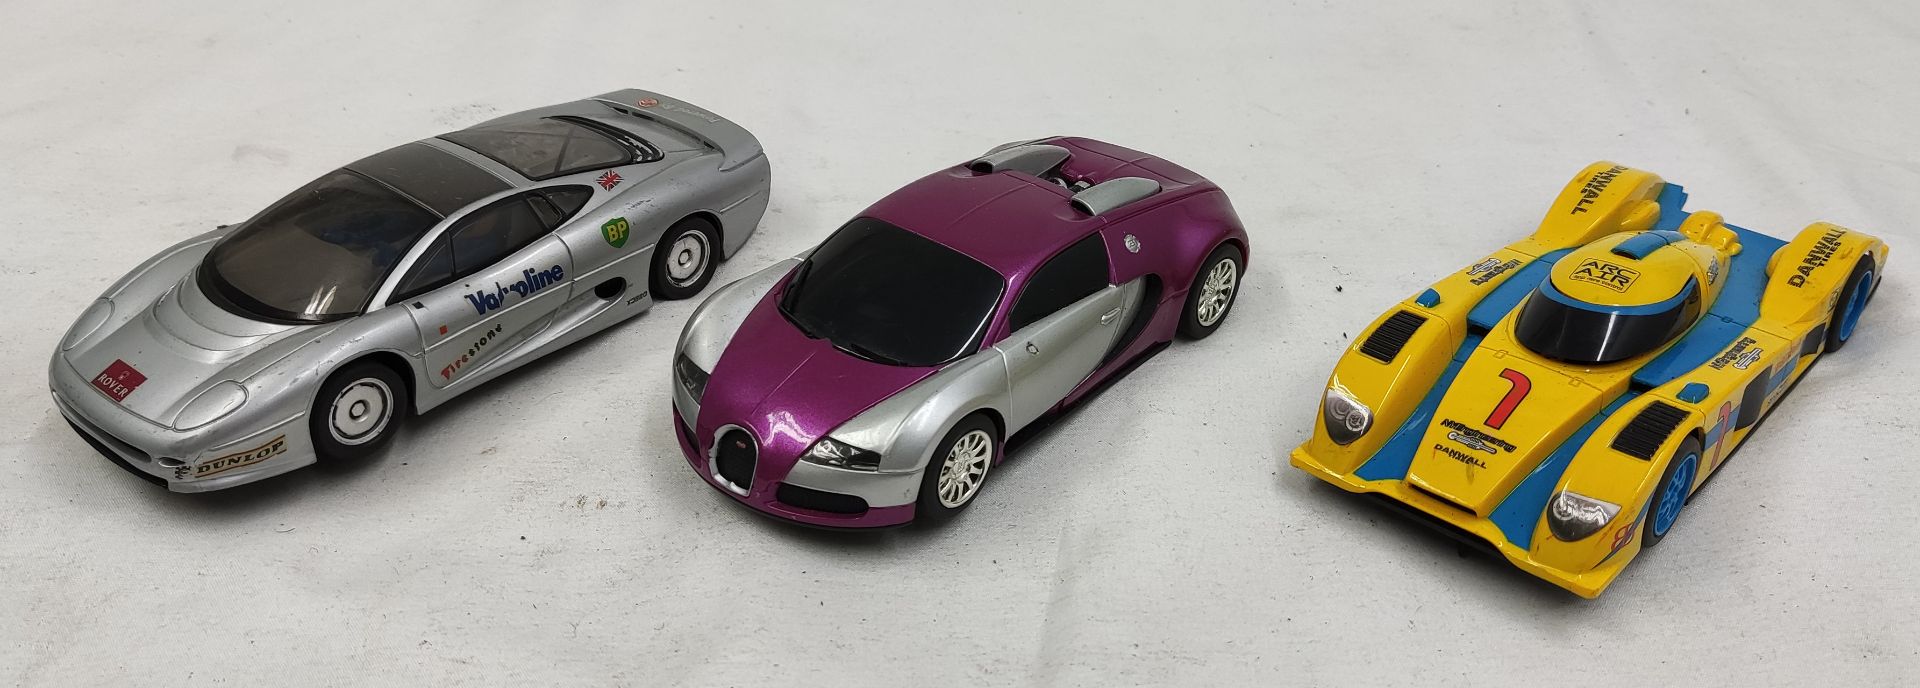 3 x Scalextric Cars - Includes Jaguar XJ220, Bugatti and LM Cars - Tested and Working - Used - CL444 - Image 4 of 14